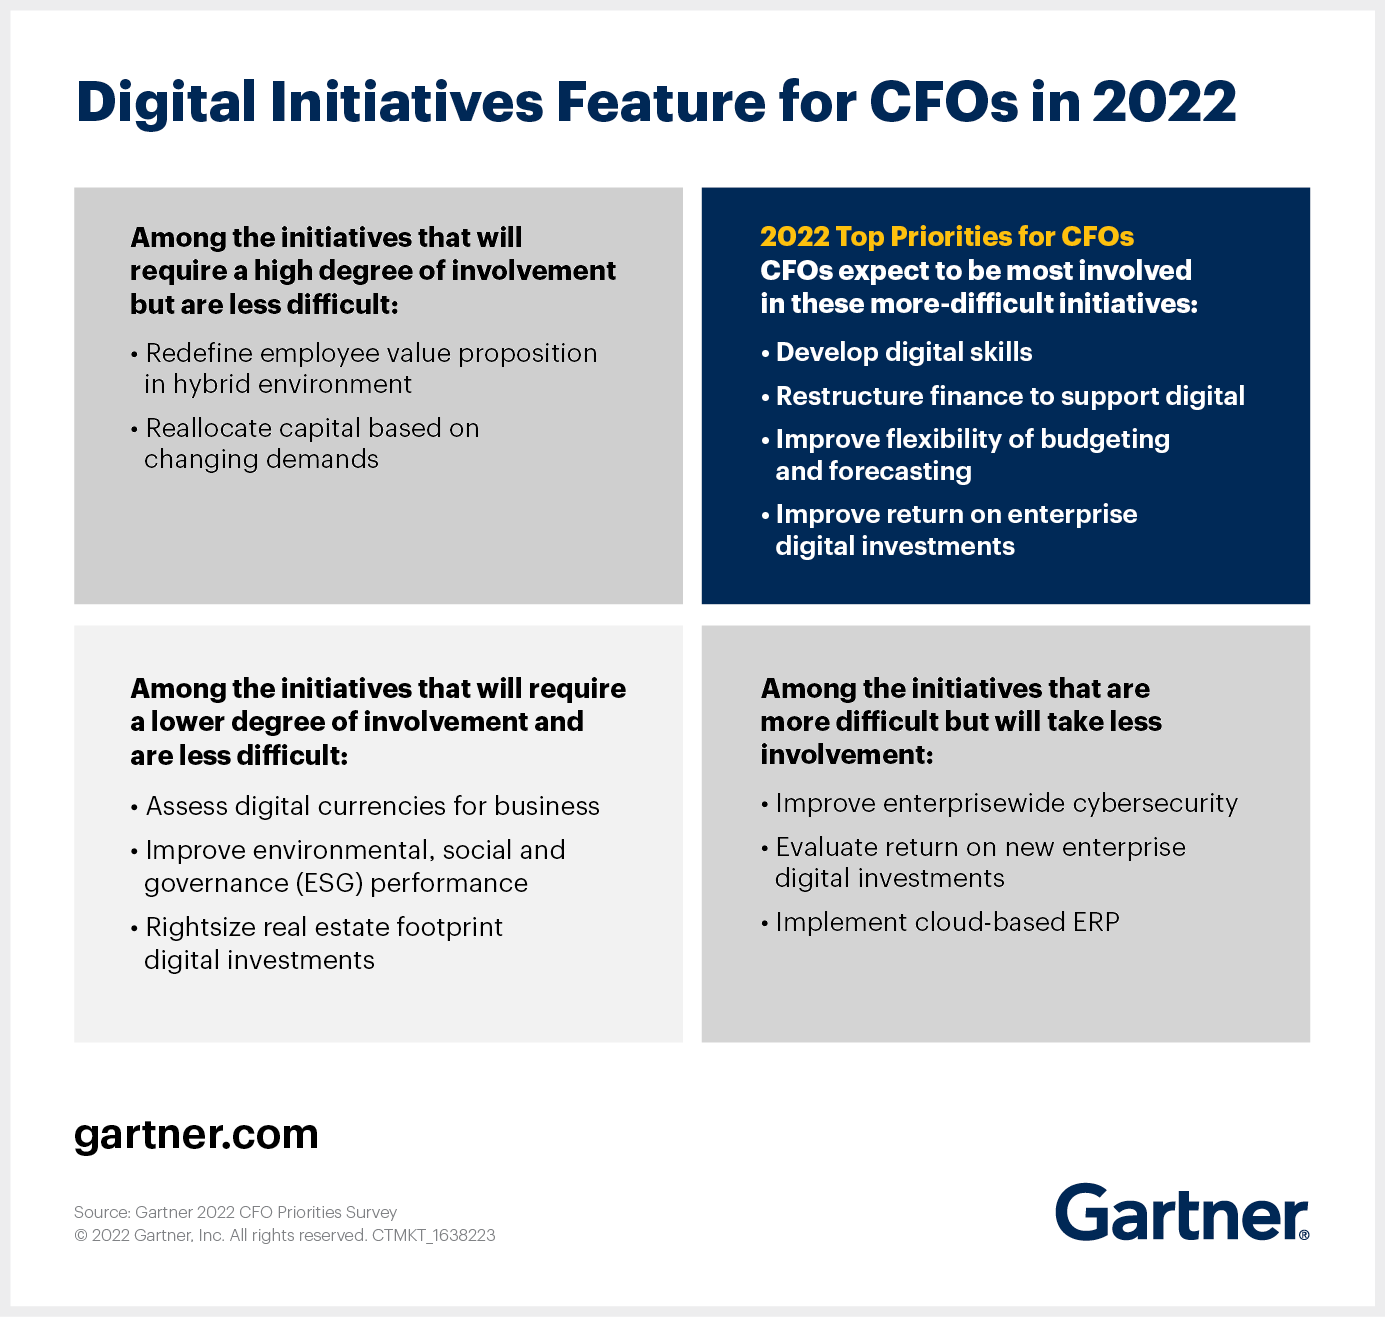 Digital initiatives feature among CFOs' top priorities for 2022 and will take both bandwidth and energy.